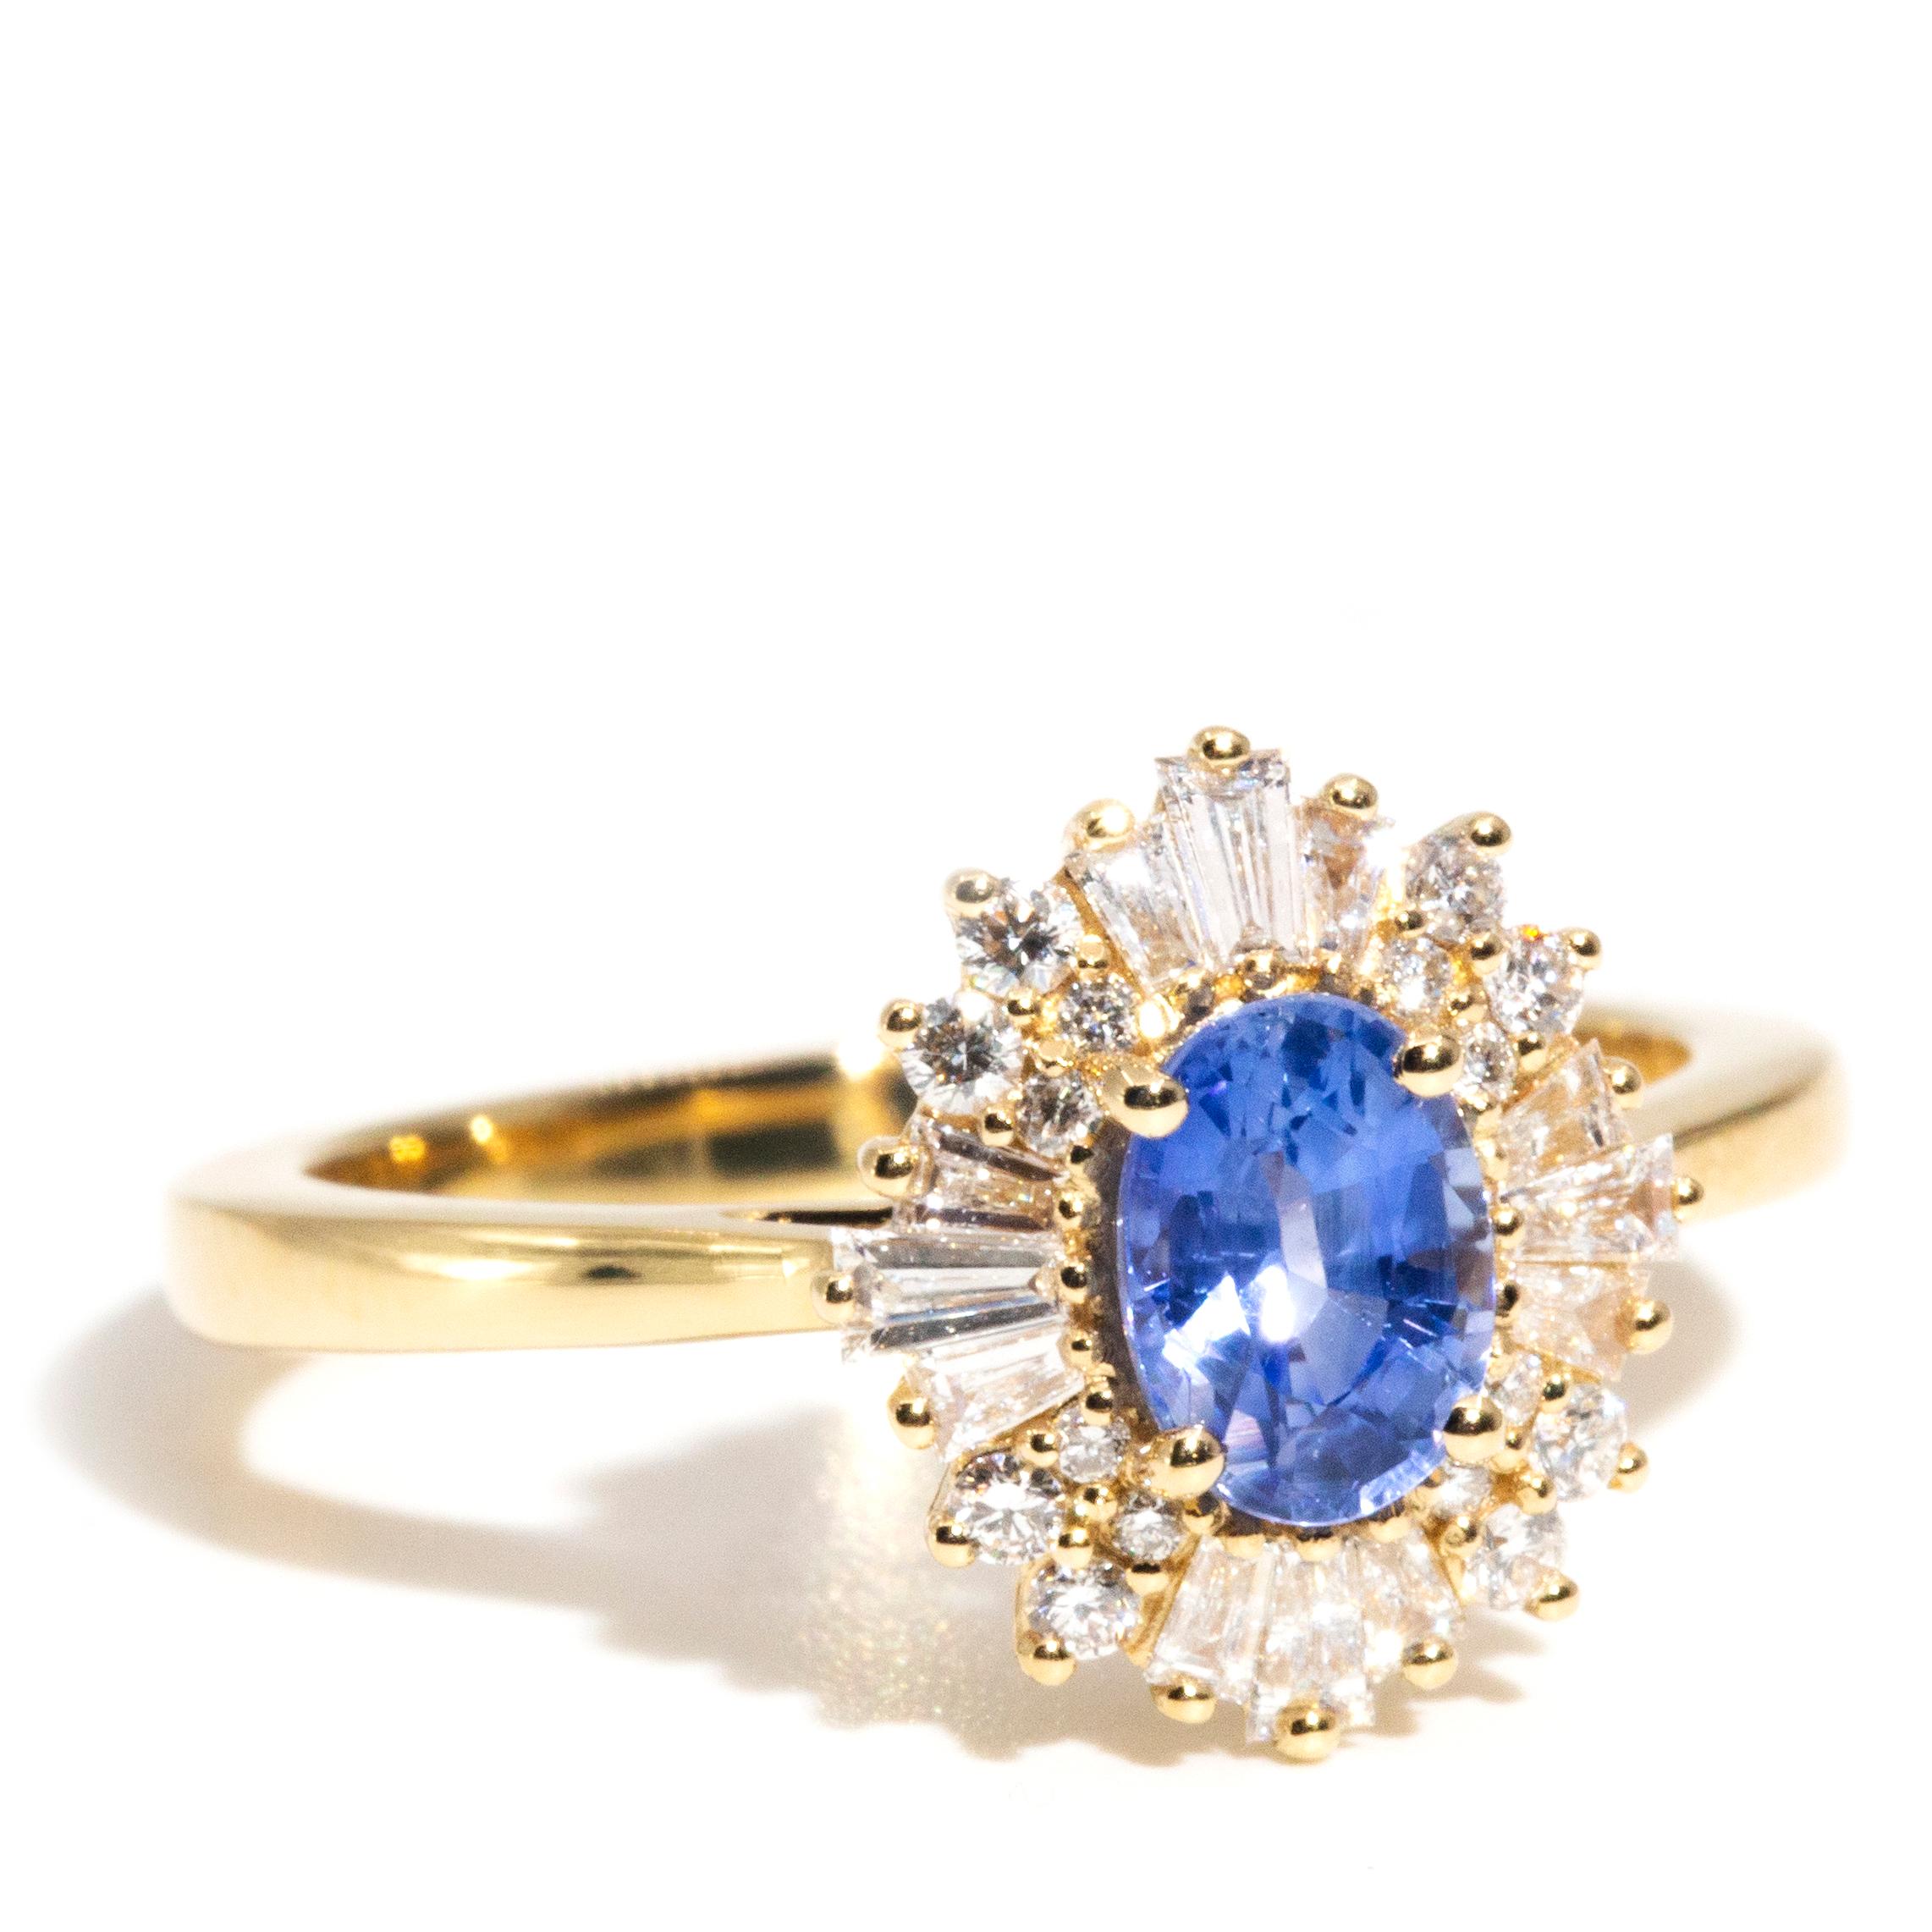 Crafted with adoration in shimmering 18 carat yellow gold, this wonderful contemporary ballerina halo cluster ring features a captivating 0.49 carat oval bright blue Ceylon sapphire encompassed by 0.48 carats of glistening round brilliant and